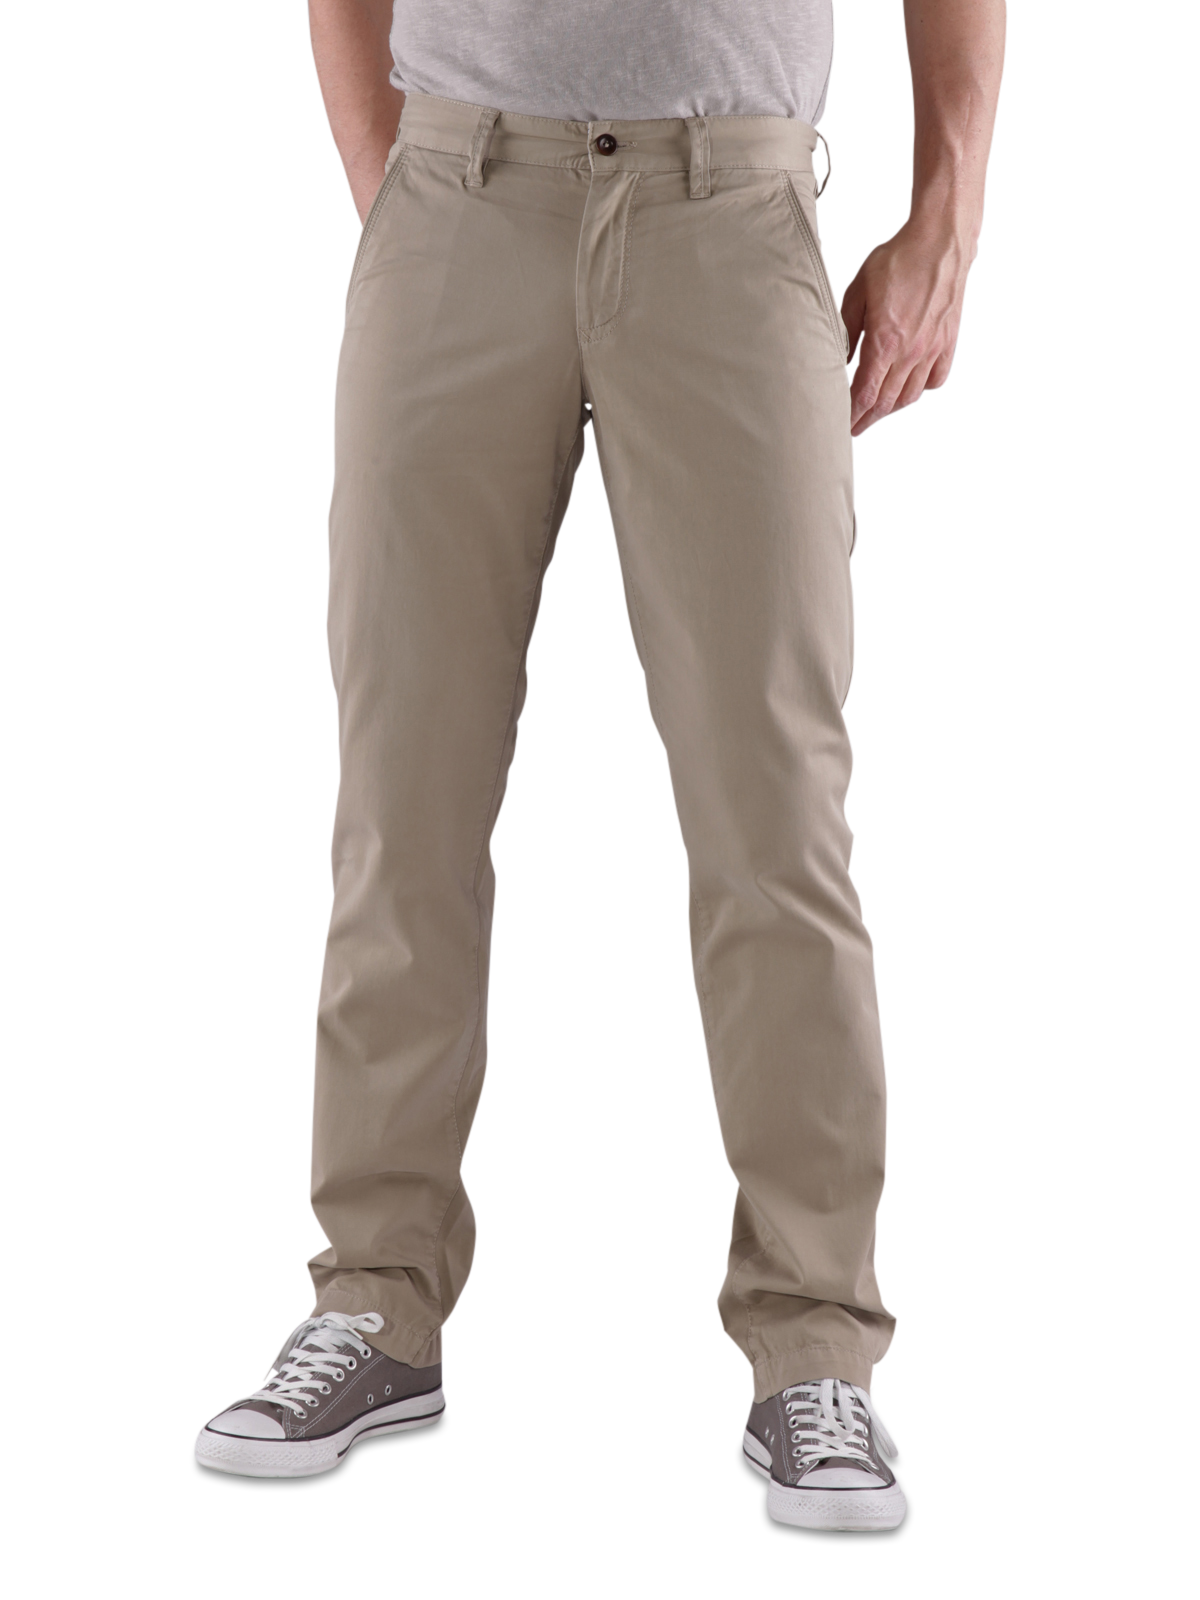 Mens Pant Picture PNG Image